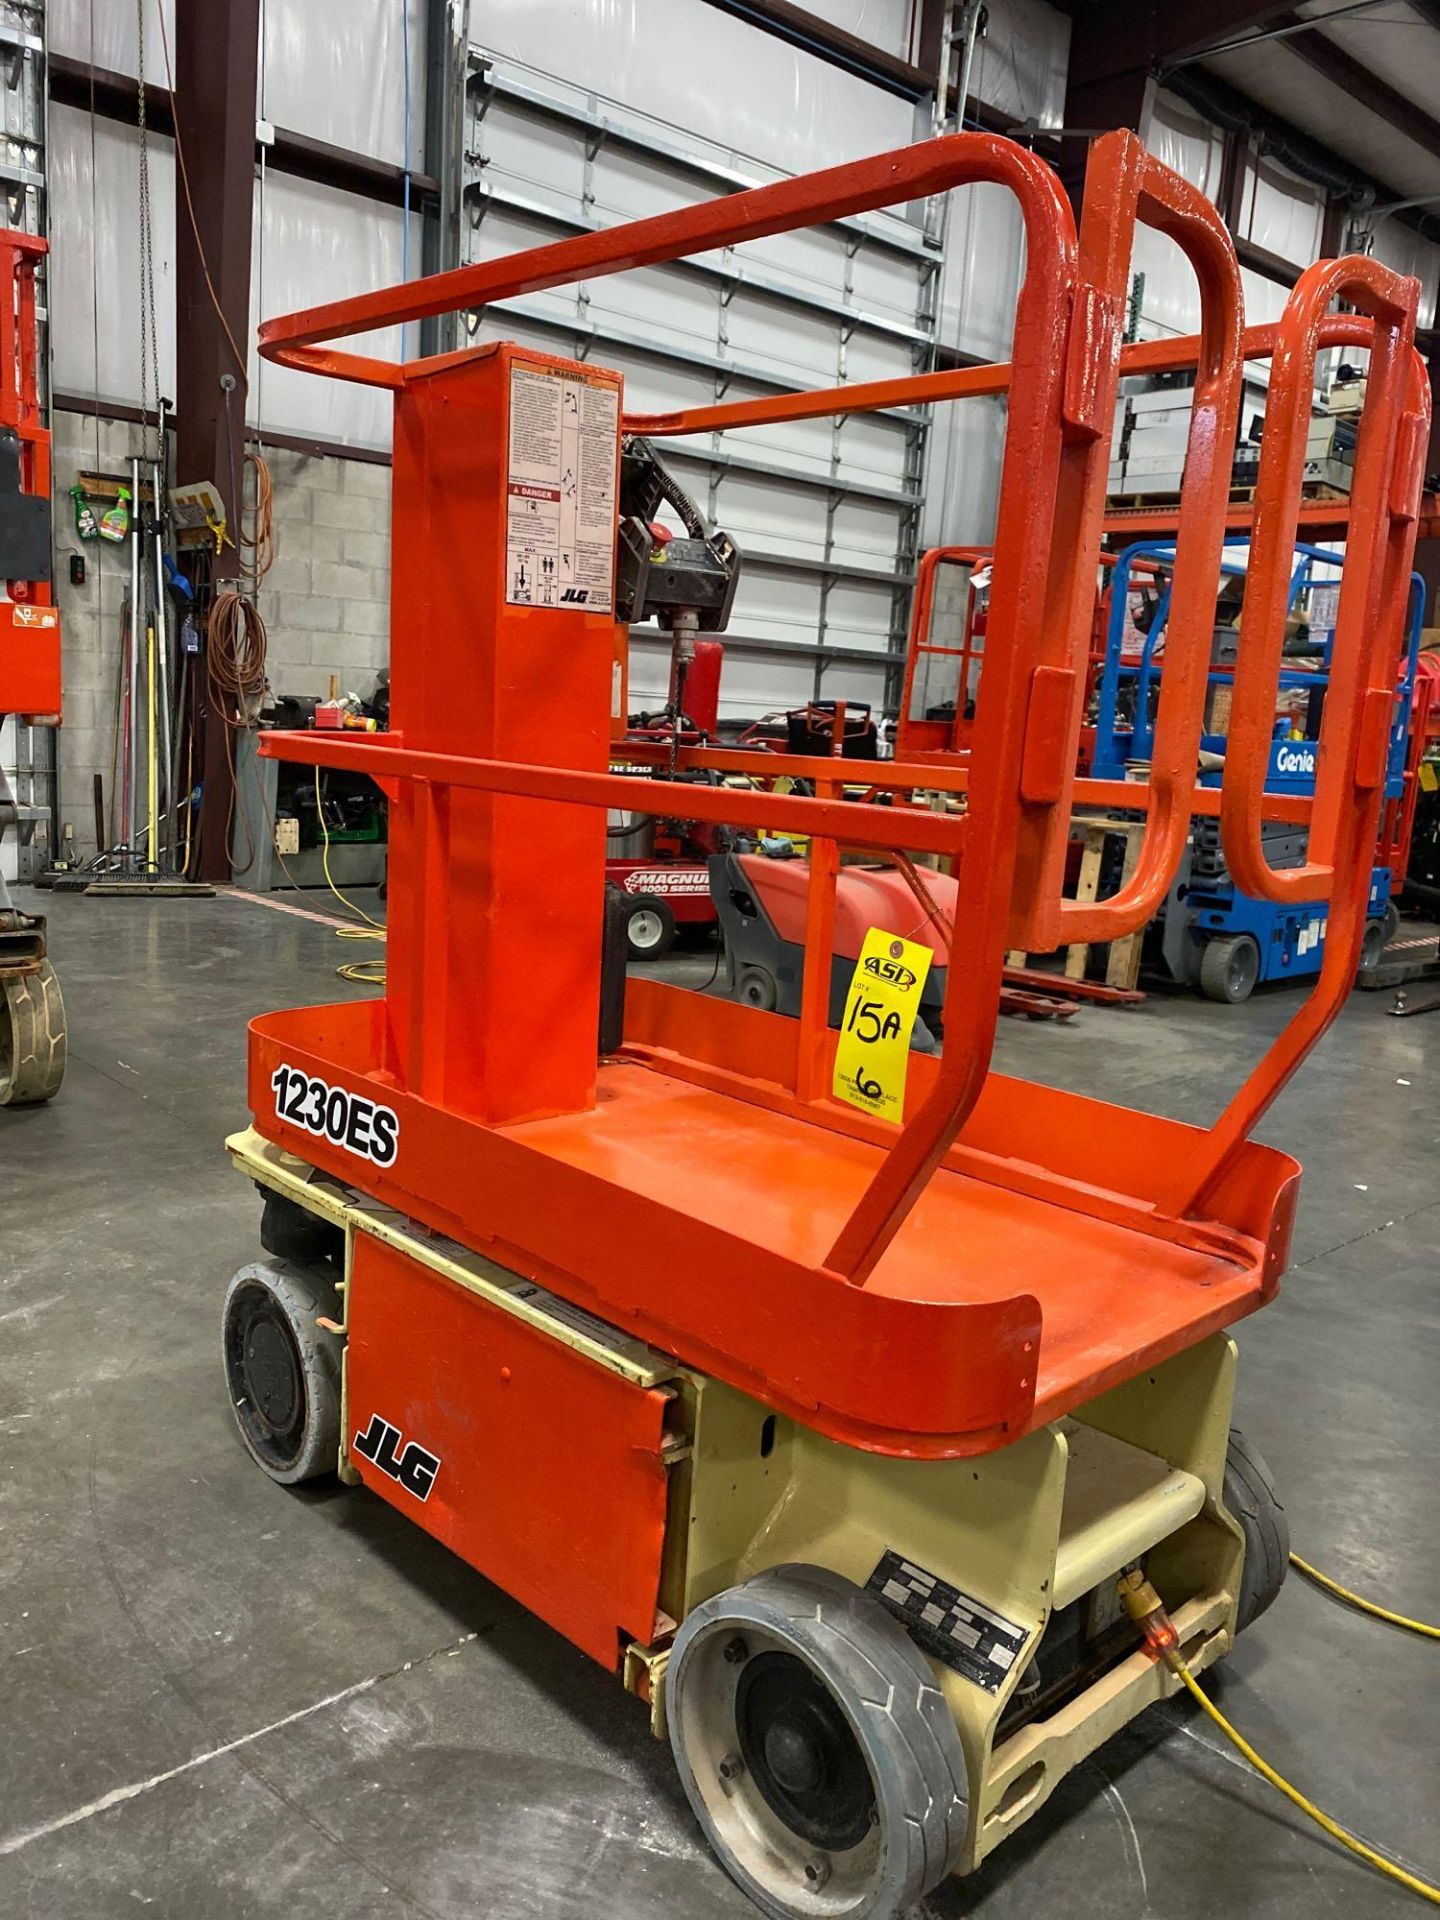 JLG 1230ES SCISSOR LIFT, 12' MAX PLATFORM HEIGHT, BUILT IN BATTERY CHARGER, NON MARKING TIRES, RUNS - Image 4 of 6